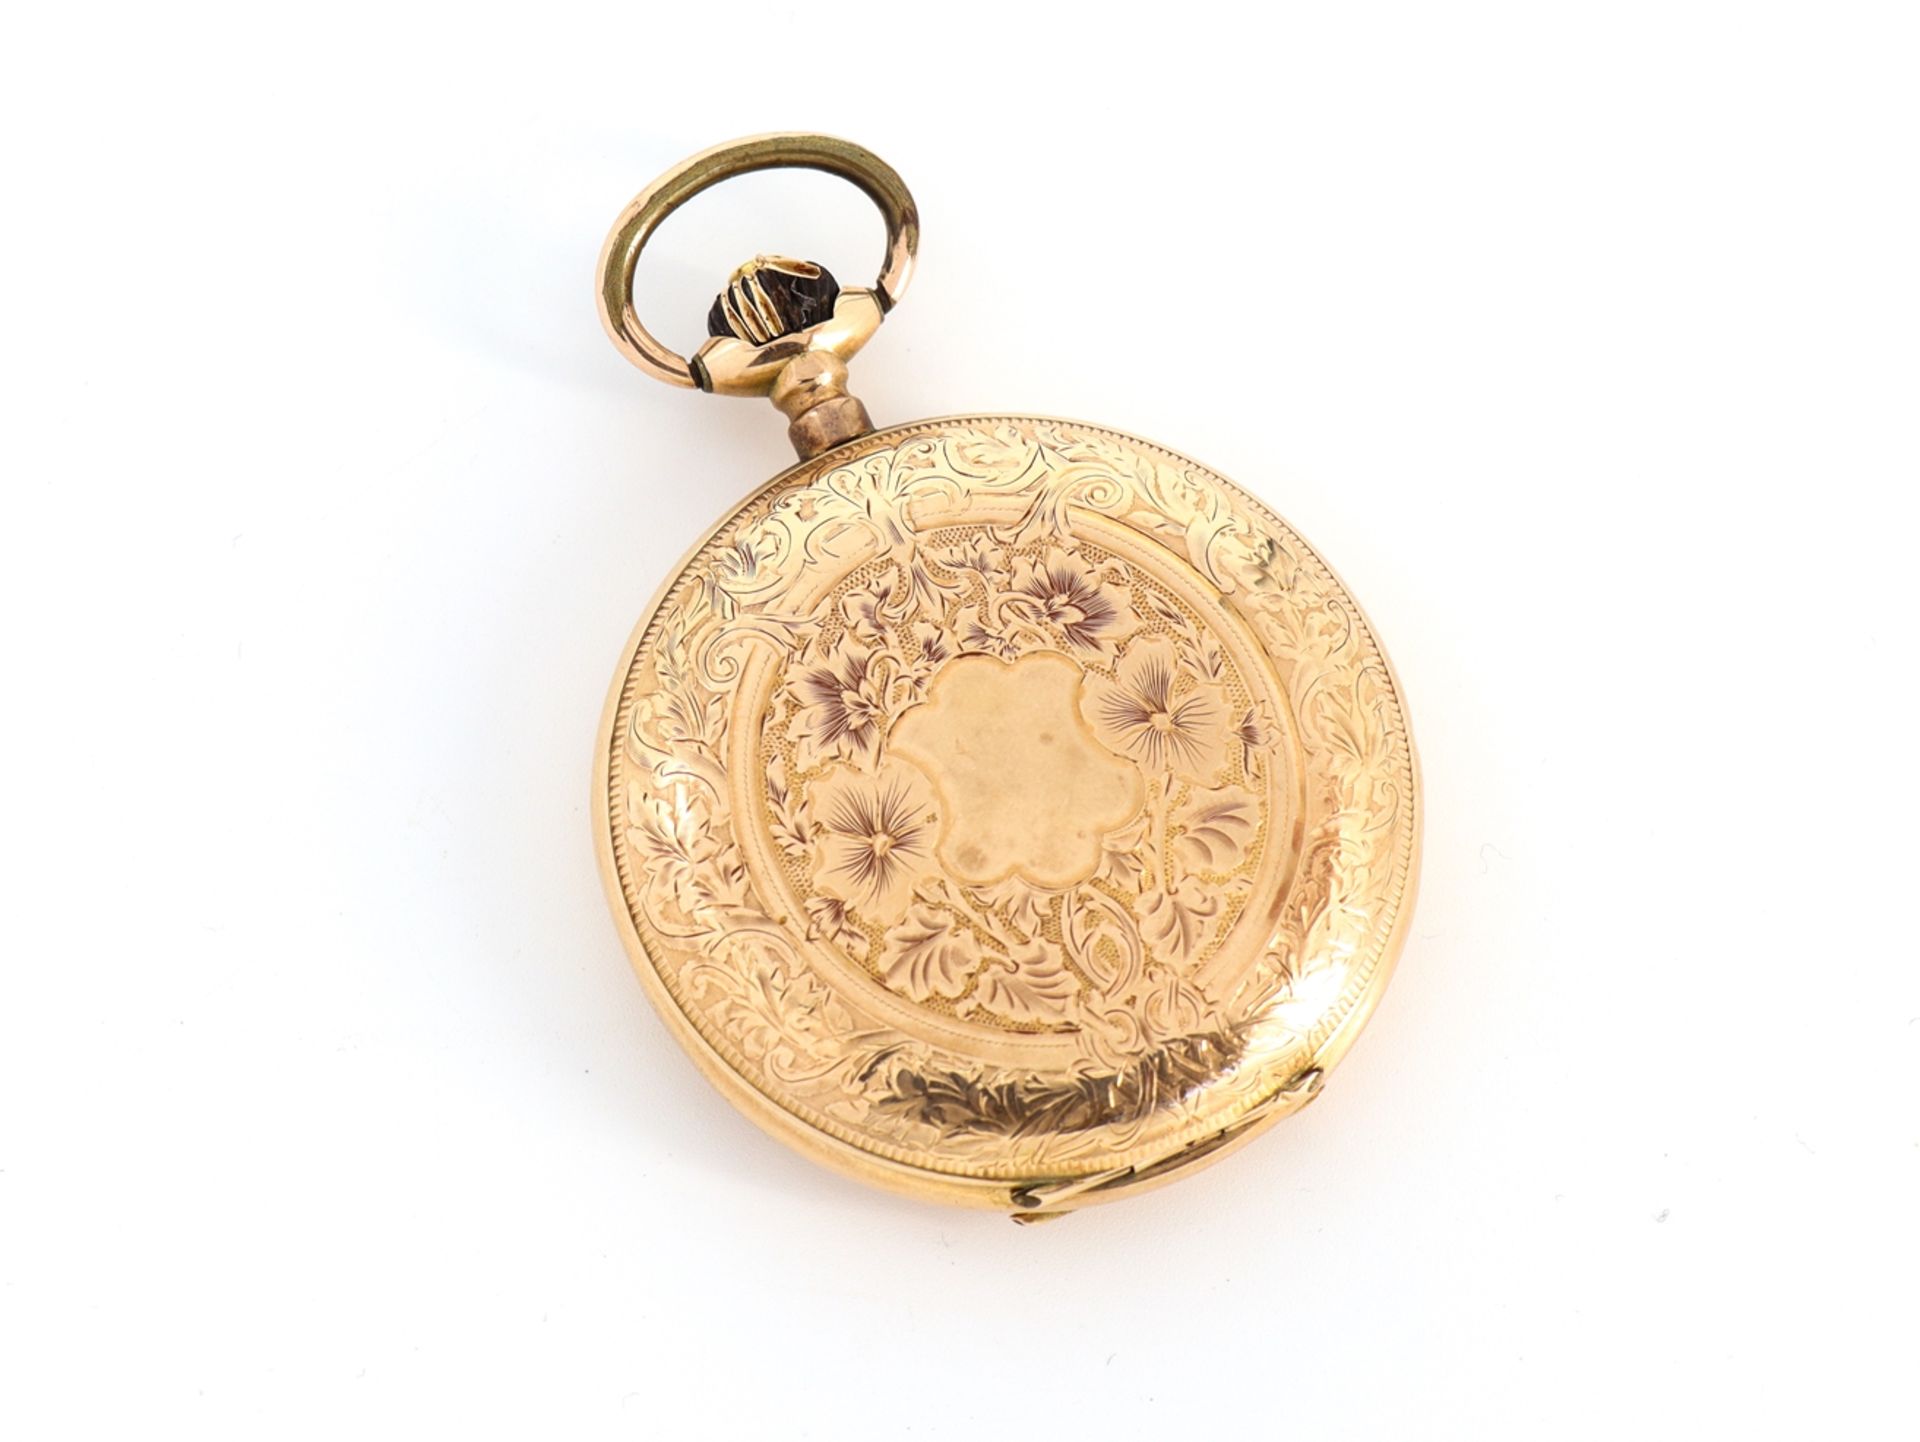 Large art nouveau pocket watch 14 K, 585 red gold, around 1900 - Image 9 of 9